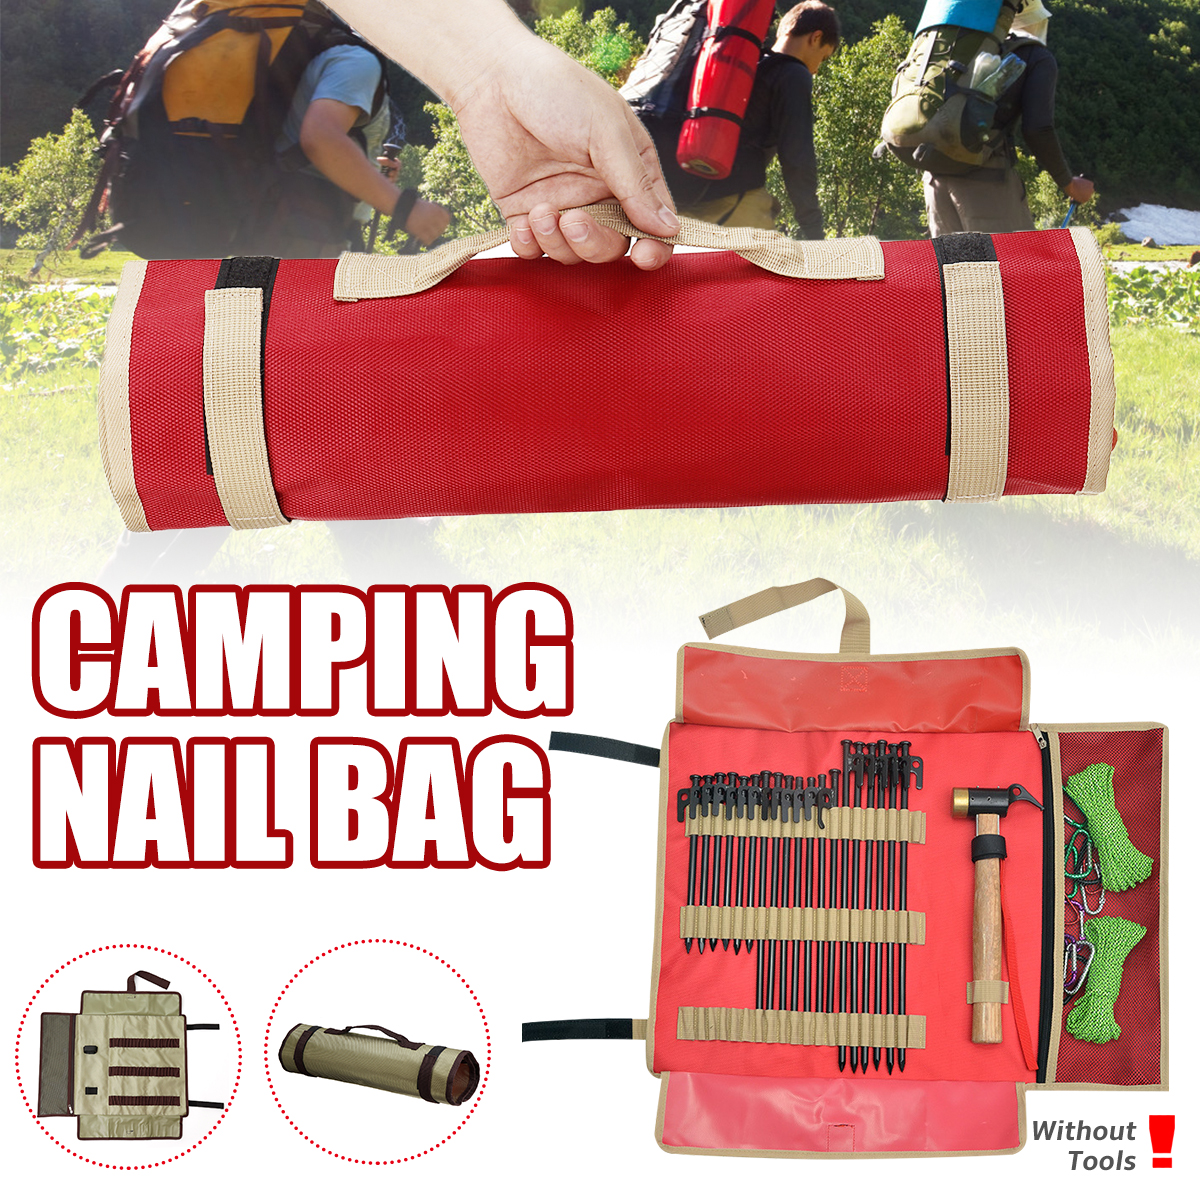 Red-Portable-Outdoor-Camping-Nail-Work-Tool-Bag-Storage-Pocket-Poucch-Handbag-Tool-Bags-1750945-1